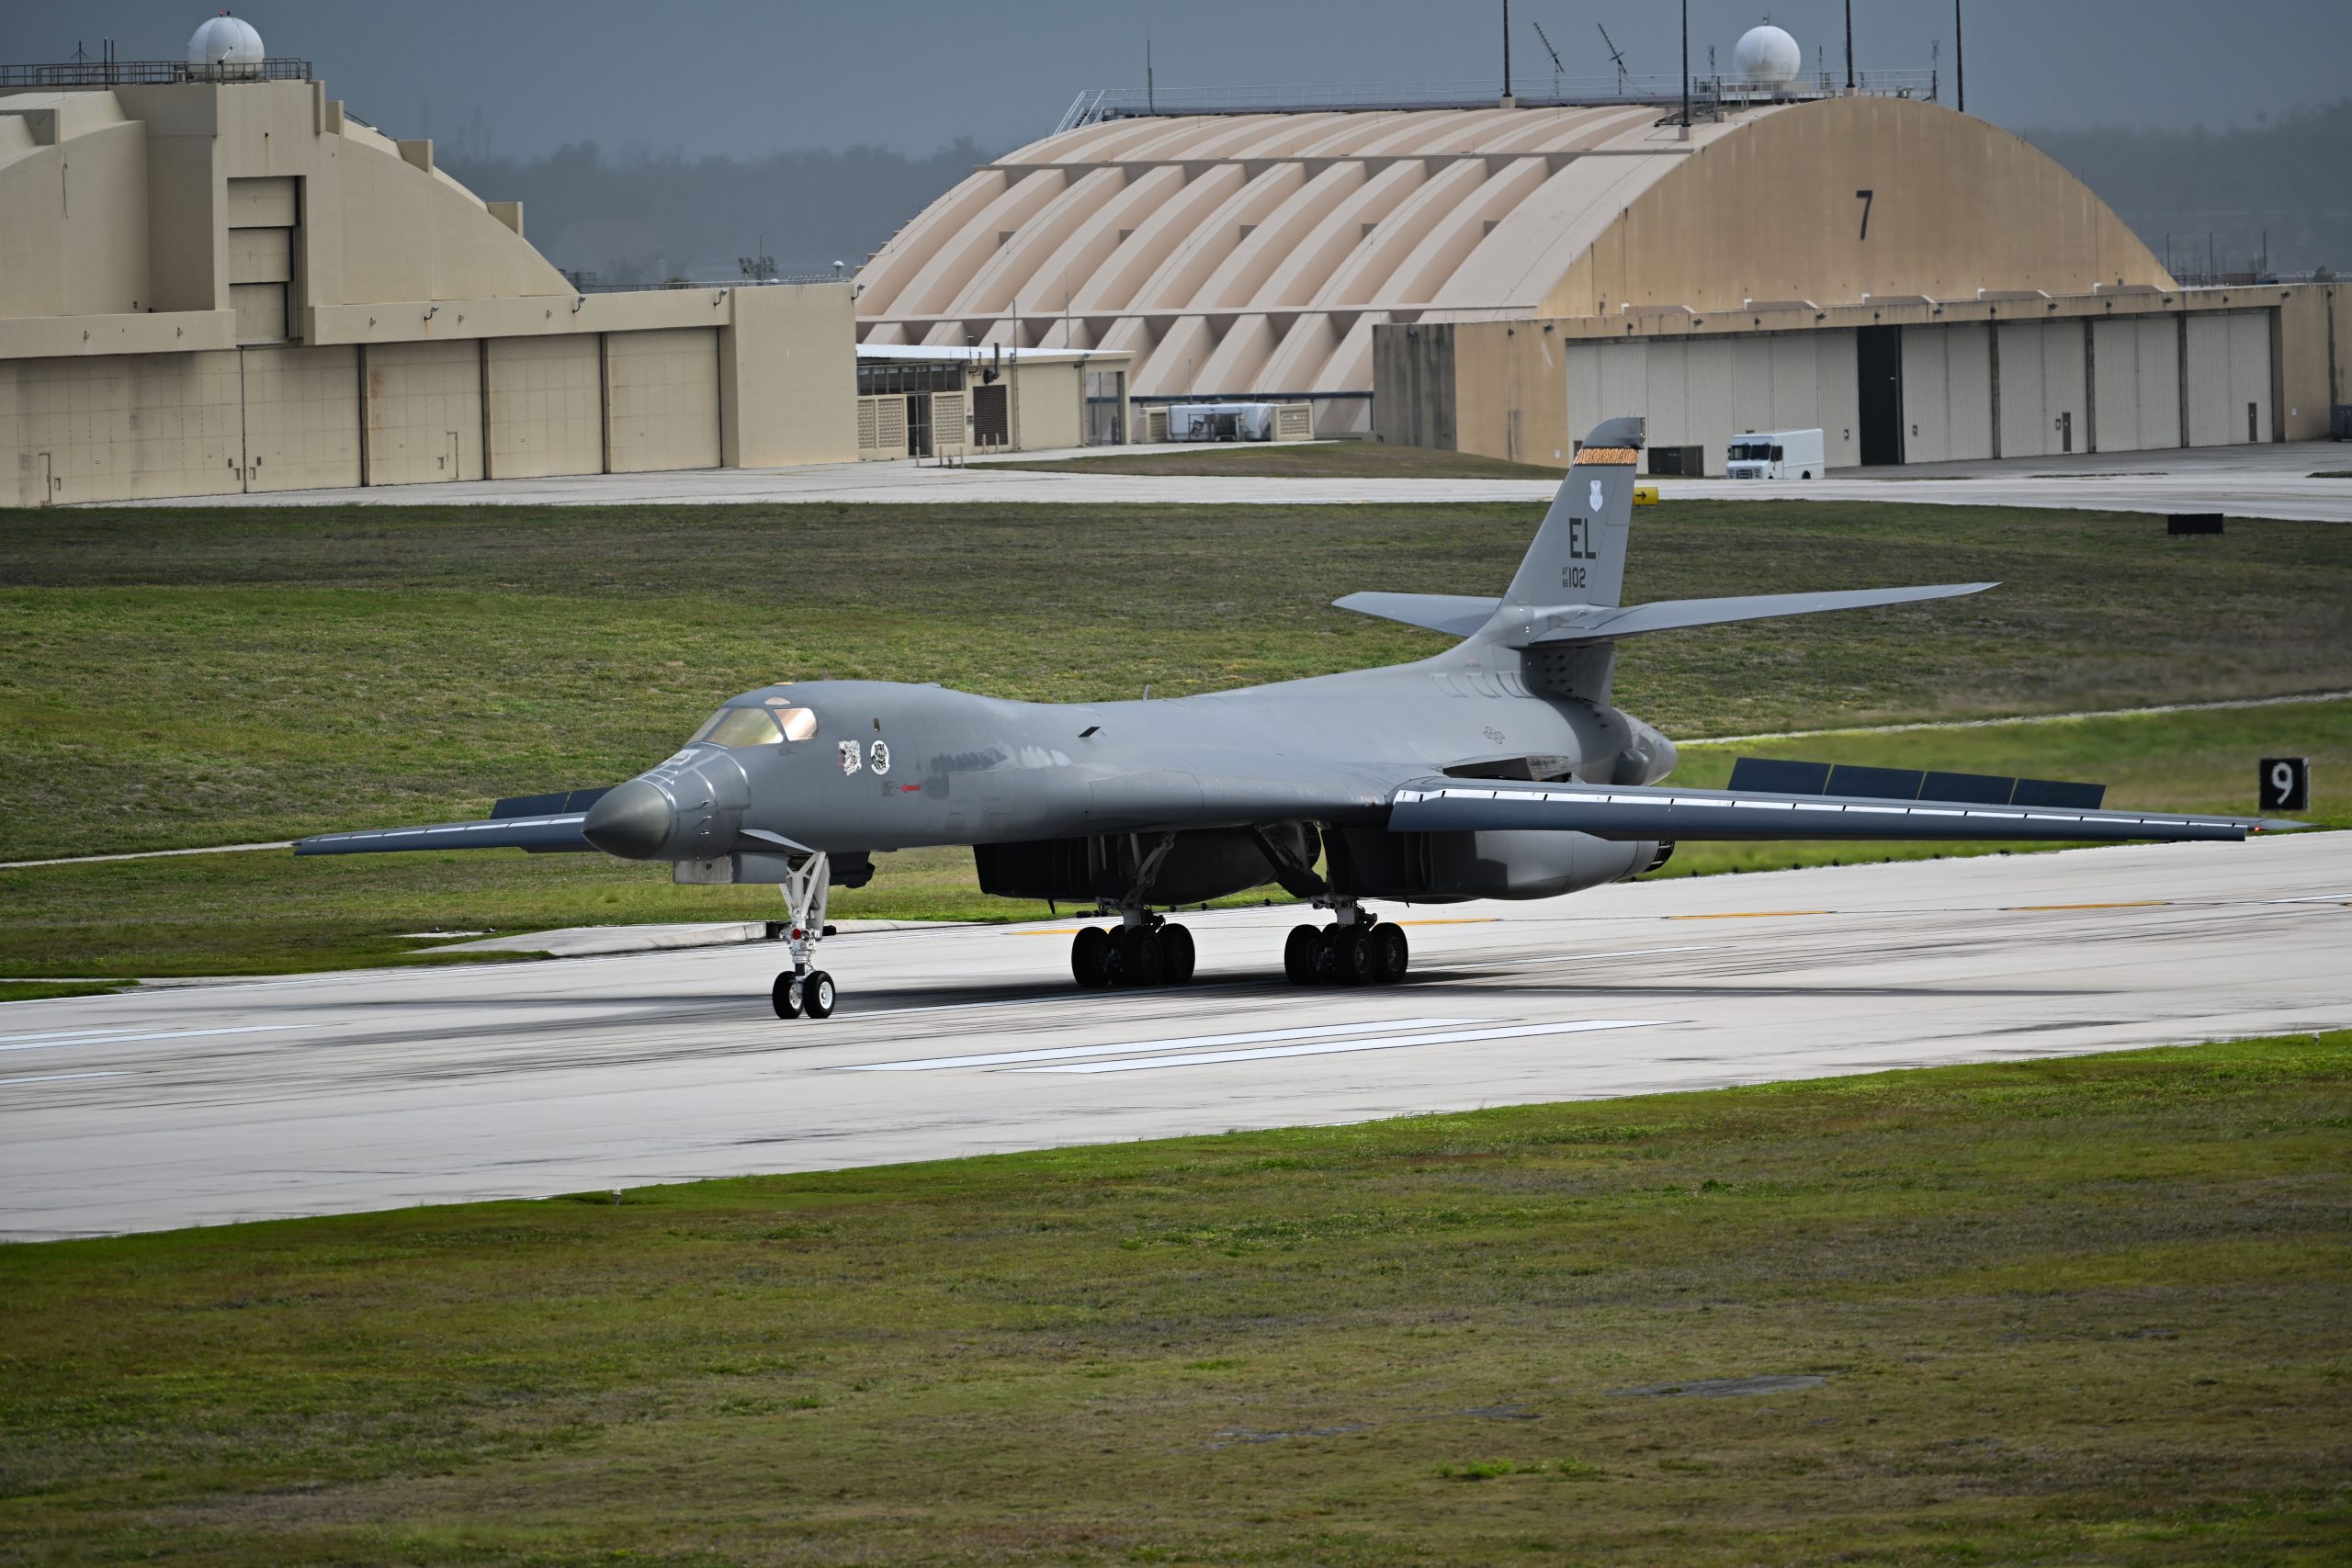 US B-1 Bombers Deployed to Guam Amid China-Taiwan Tensions: A New Crisis in the Pacific?